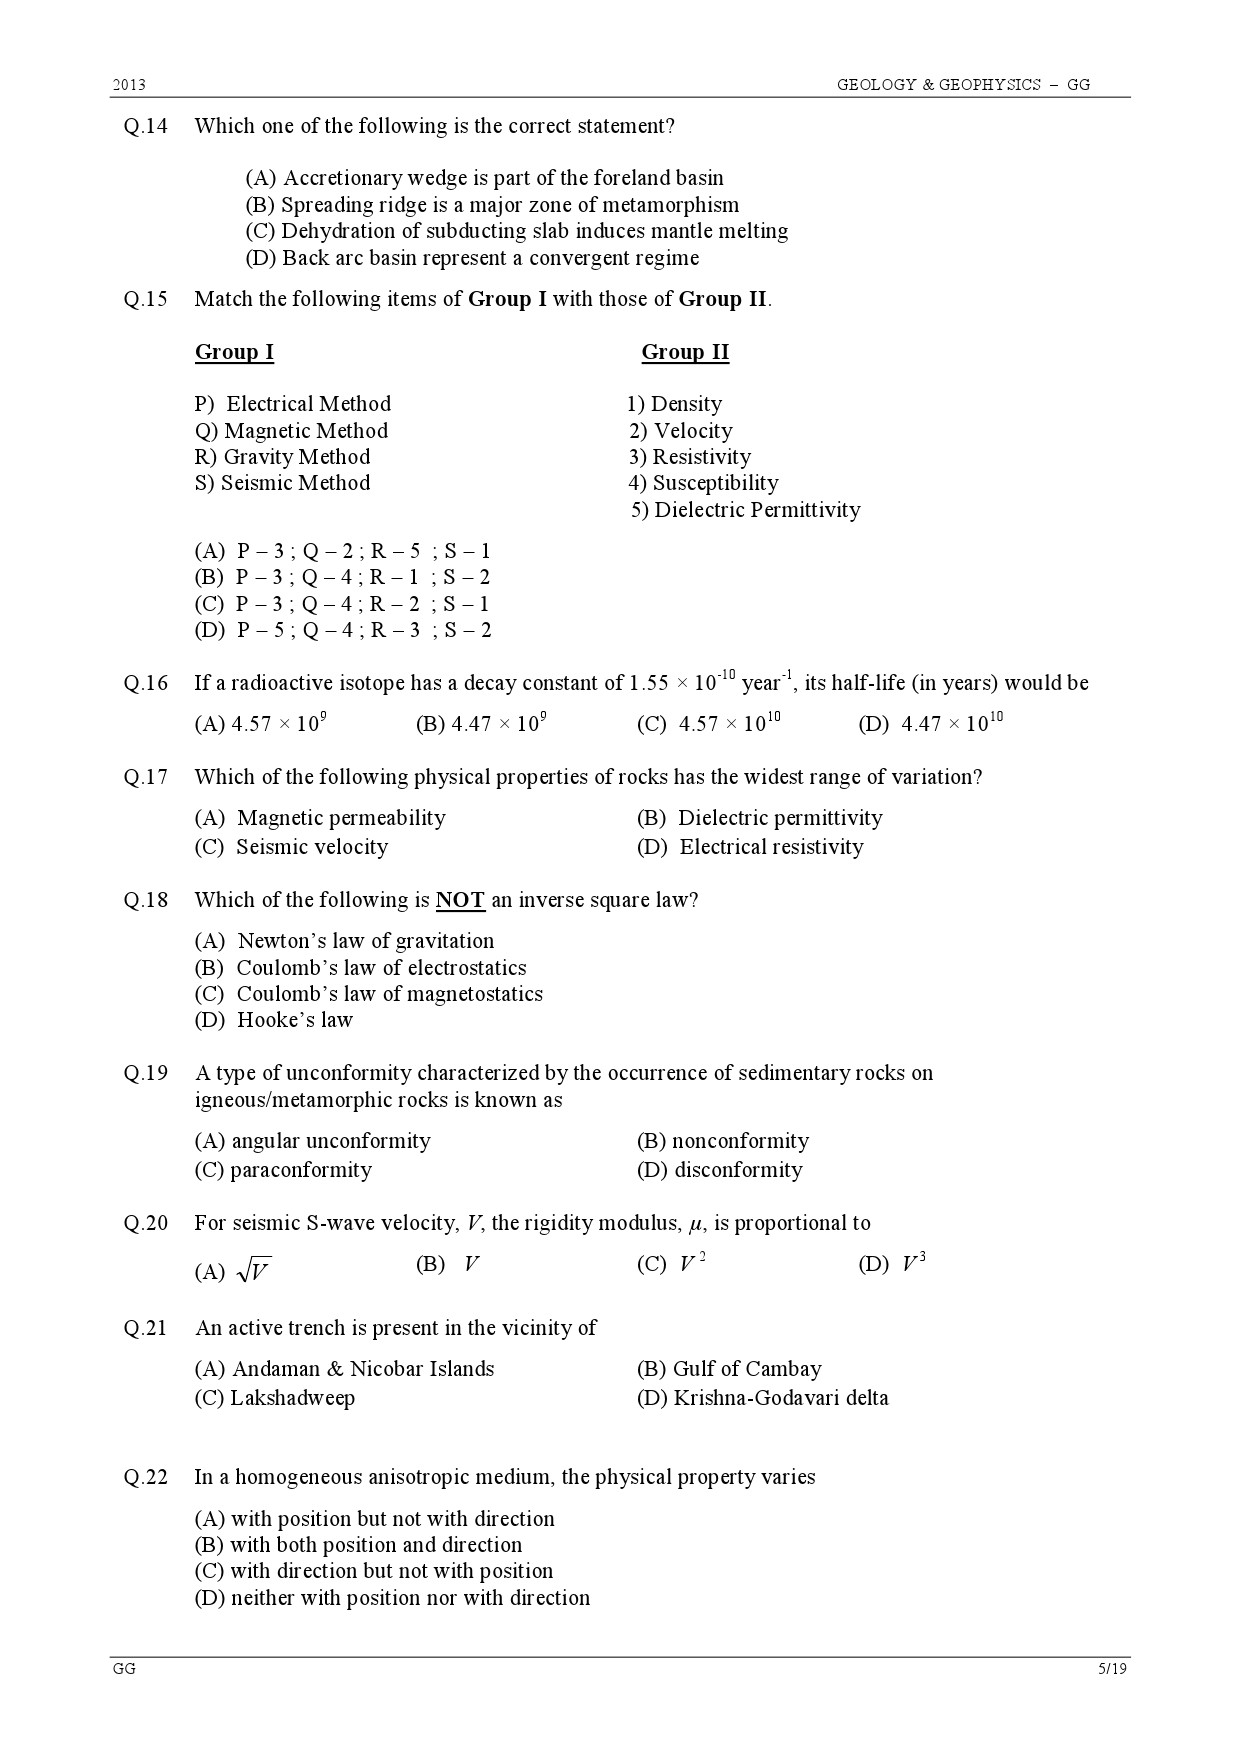 GATE Exam Question Paper 2013 Geology and Geophysics 5